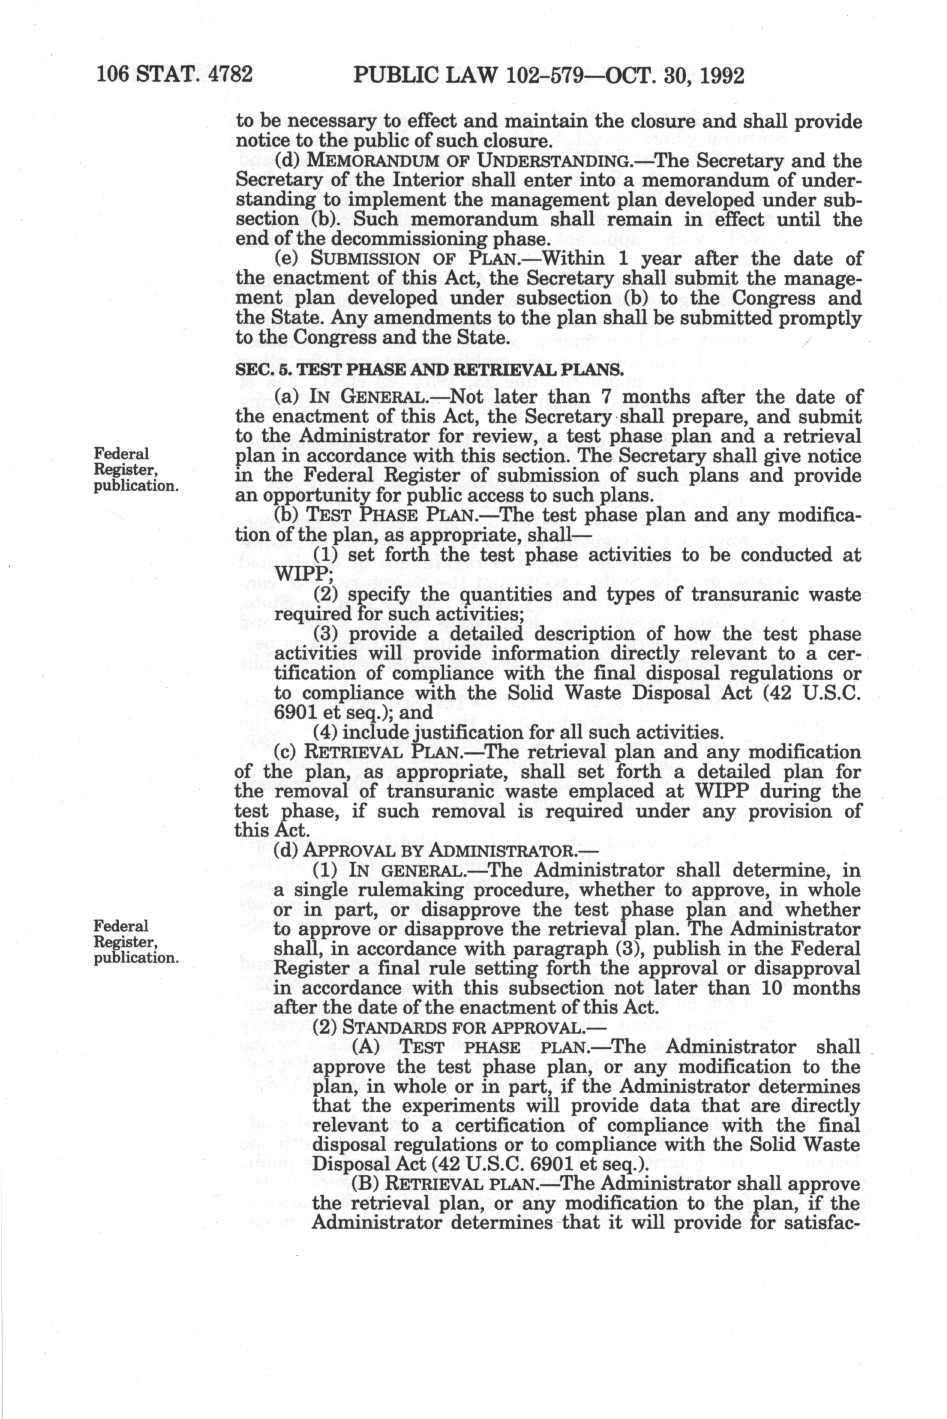 106 STAT. 4782 PUBLIC LAW 102-579 OCT. 30, 1992 Federal Register, publication. Federal Register, publication. to be necessary to effect and maintain the closure and shall provide notice to the public of such closure.